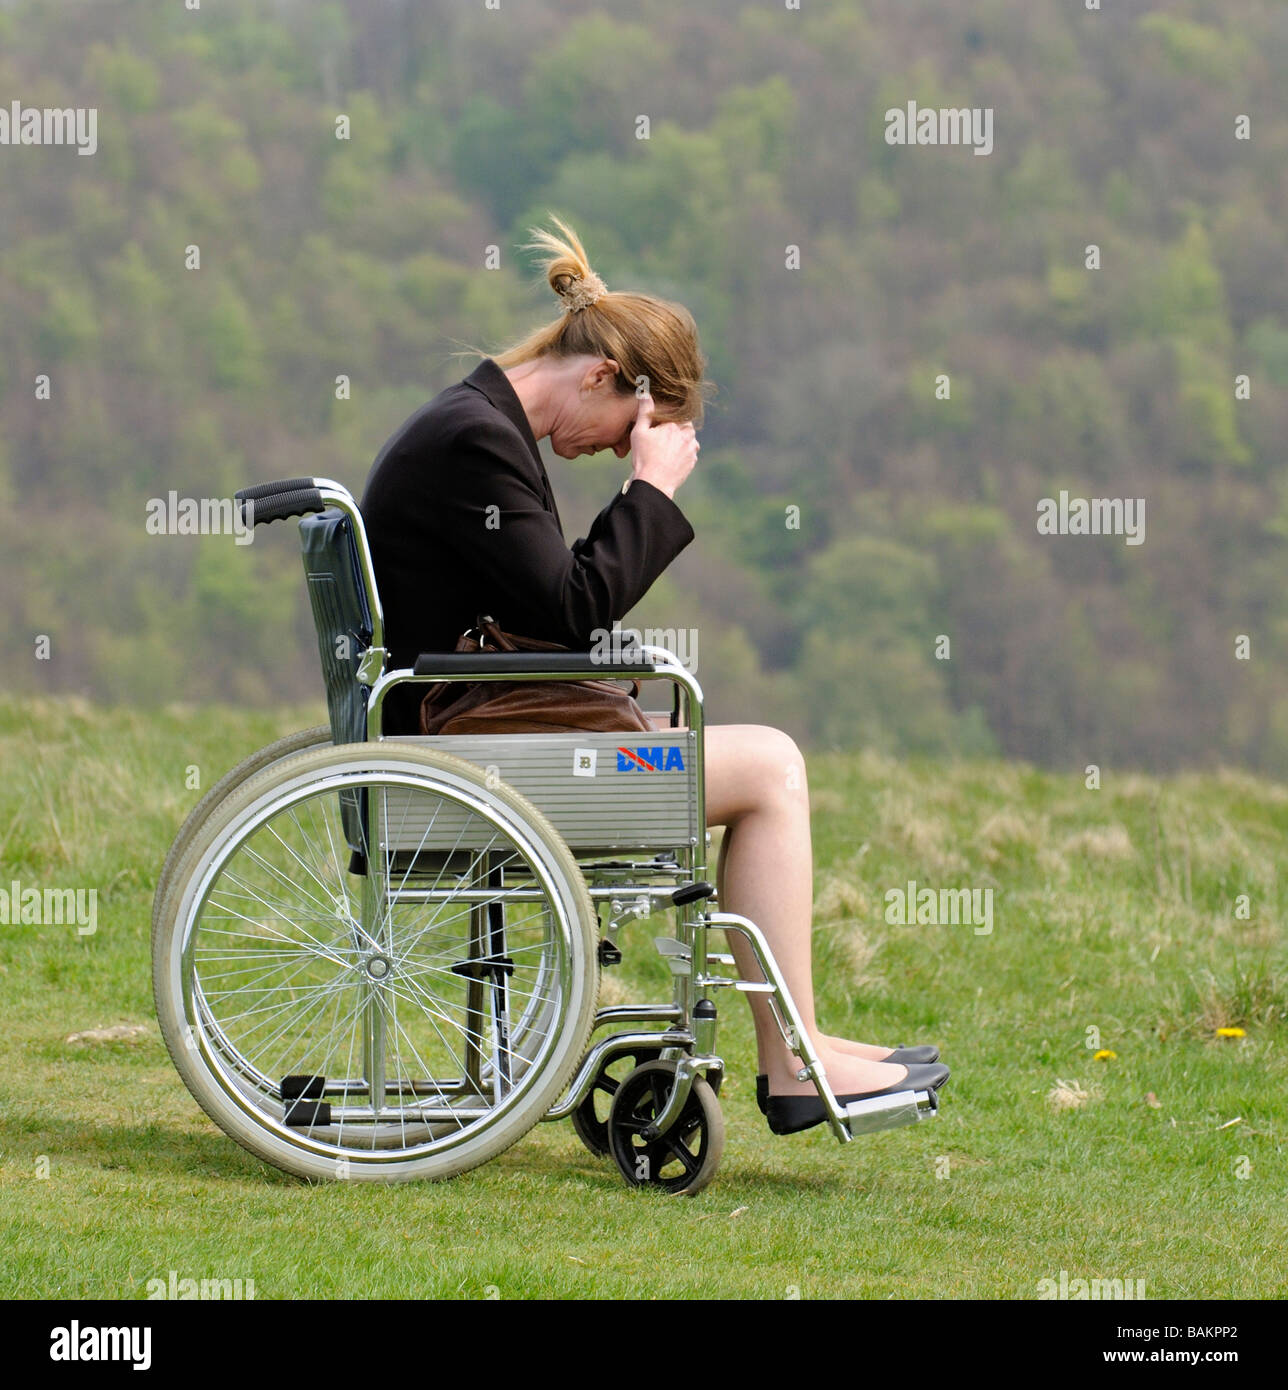 woman with head in hands sitting in a self propel dma wheelchair overlooking english countryside Stock Photo